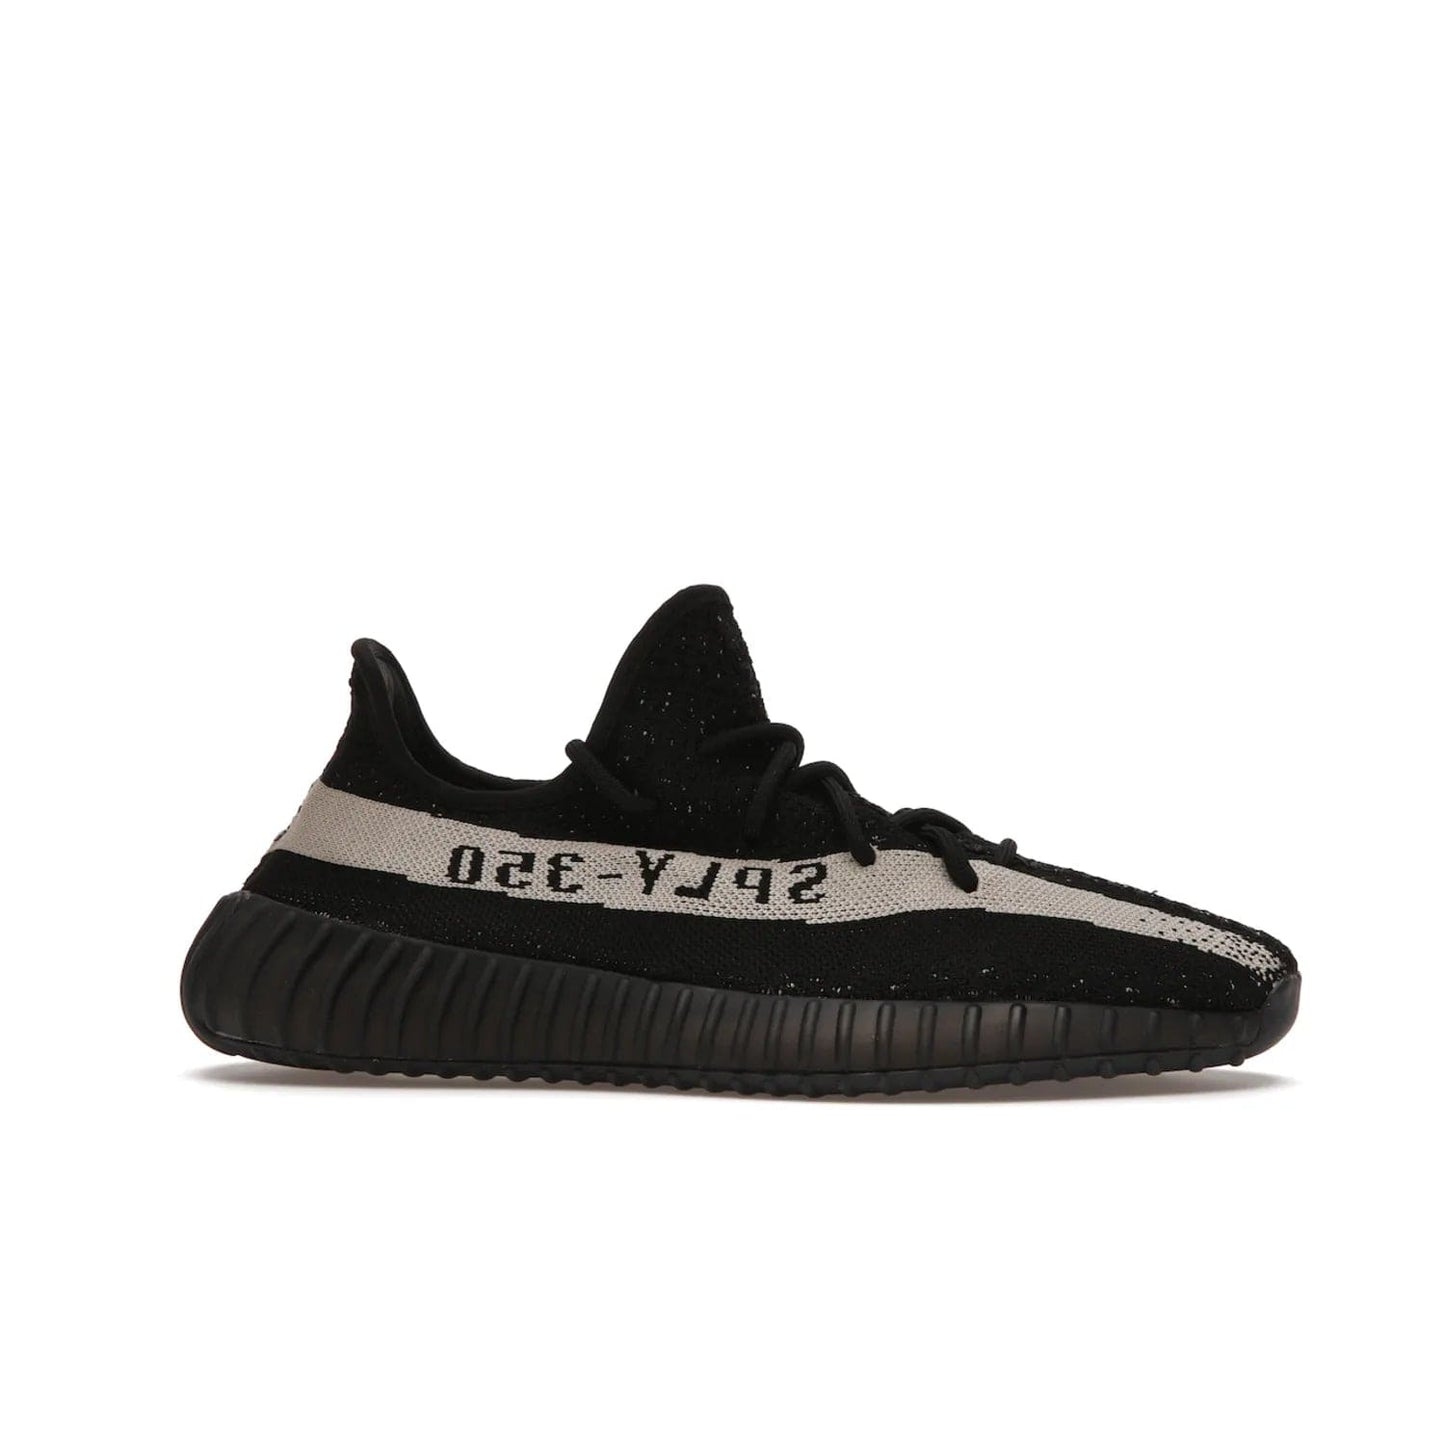 adidas Yeezy Boost 350 V2 Core Black White (2016/2022) - Image 2 - Only at www.BallersClubKickz.com - Stylish adidas Yeezy Boost 350 V2 in classic black with white "SPLY-350" stitched to the side stripe. Features Primeknit upper & Boost sole for comfort. Restock in March 2022.